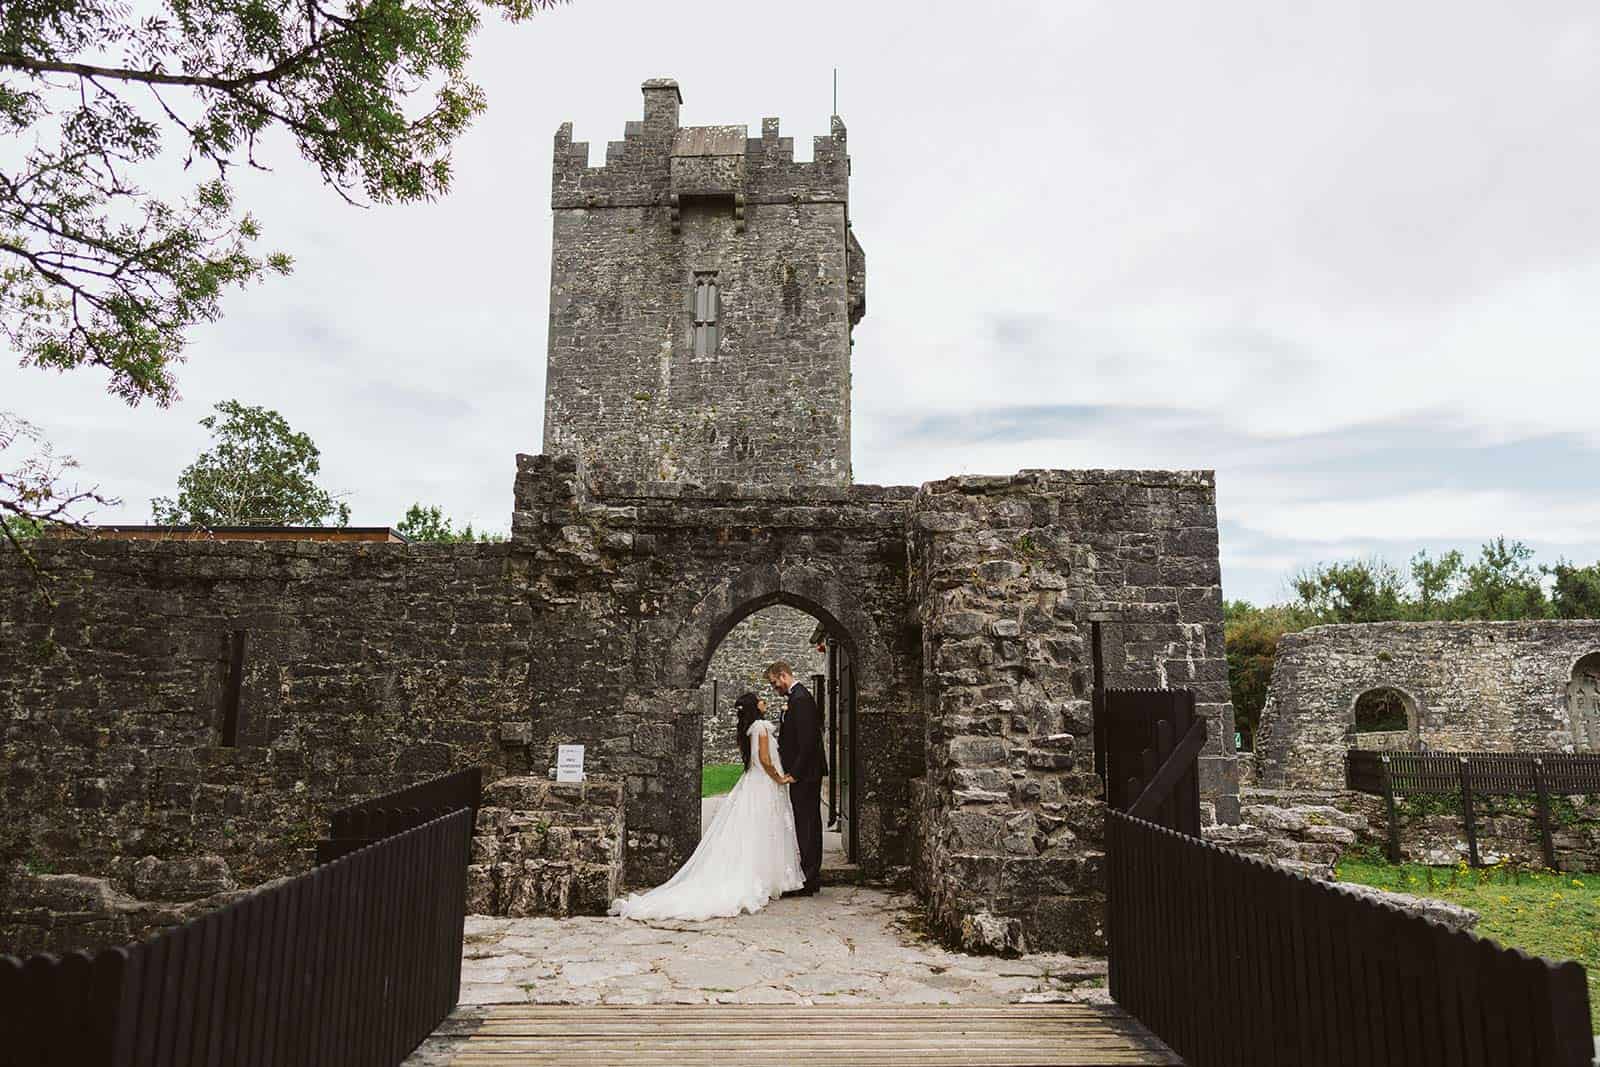 couple at castle ruin on wedding day eloping in Ireland